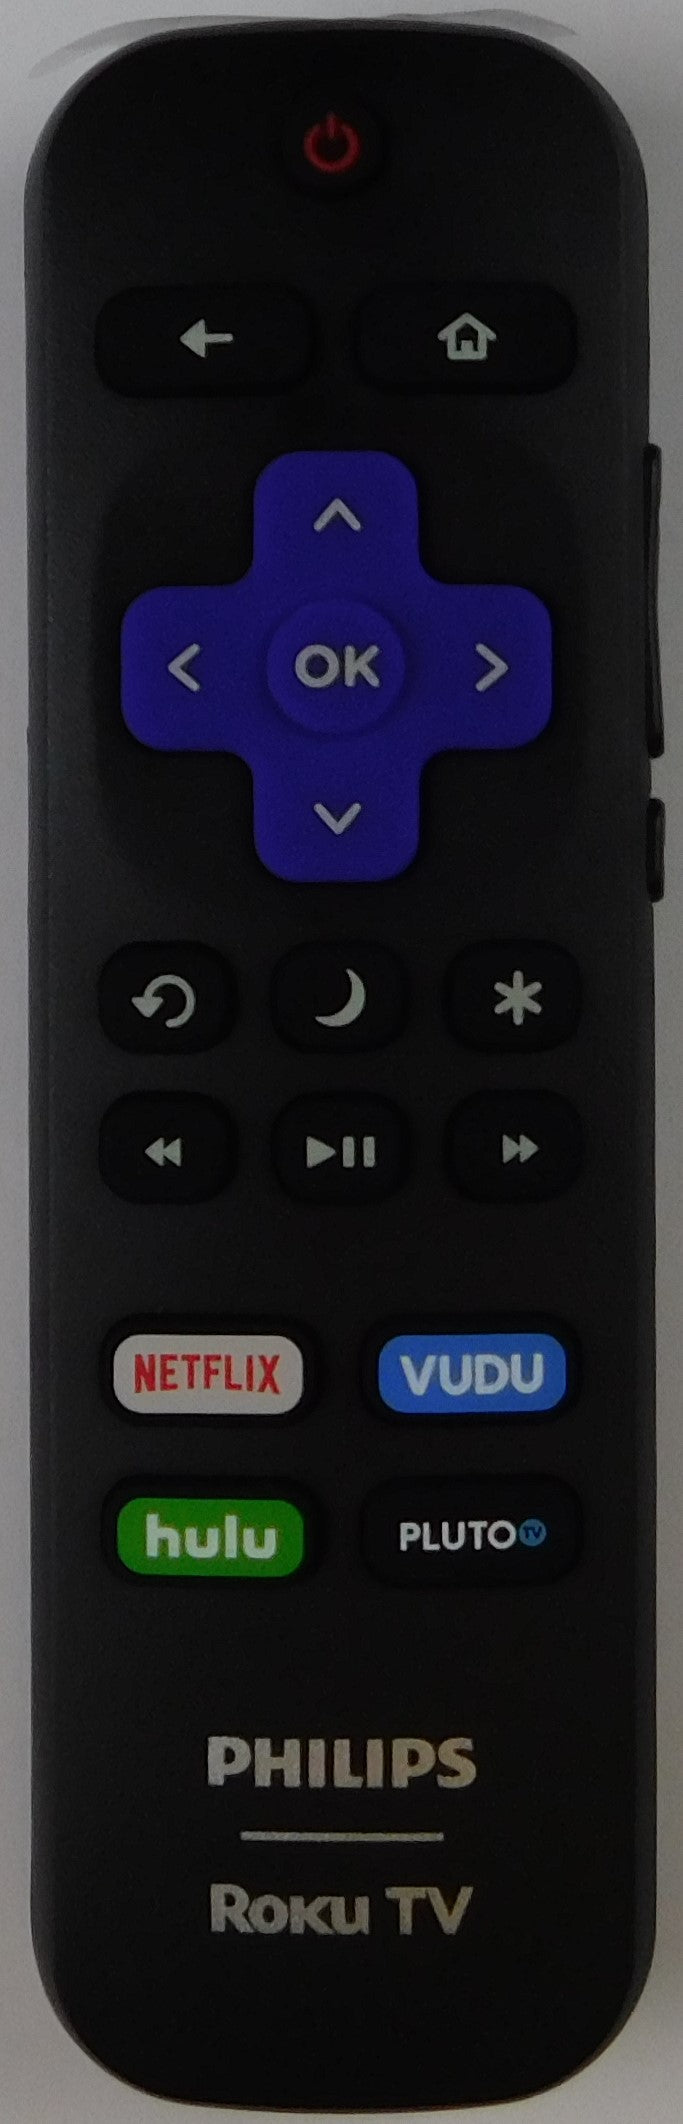 Original OEM replacement remote control for Philips Roku TVs 06-518W21-PH01X